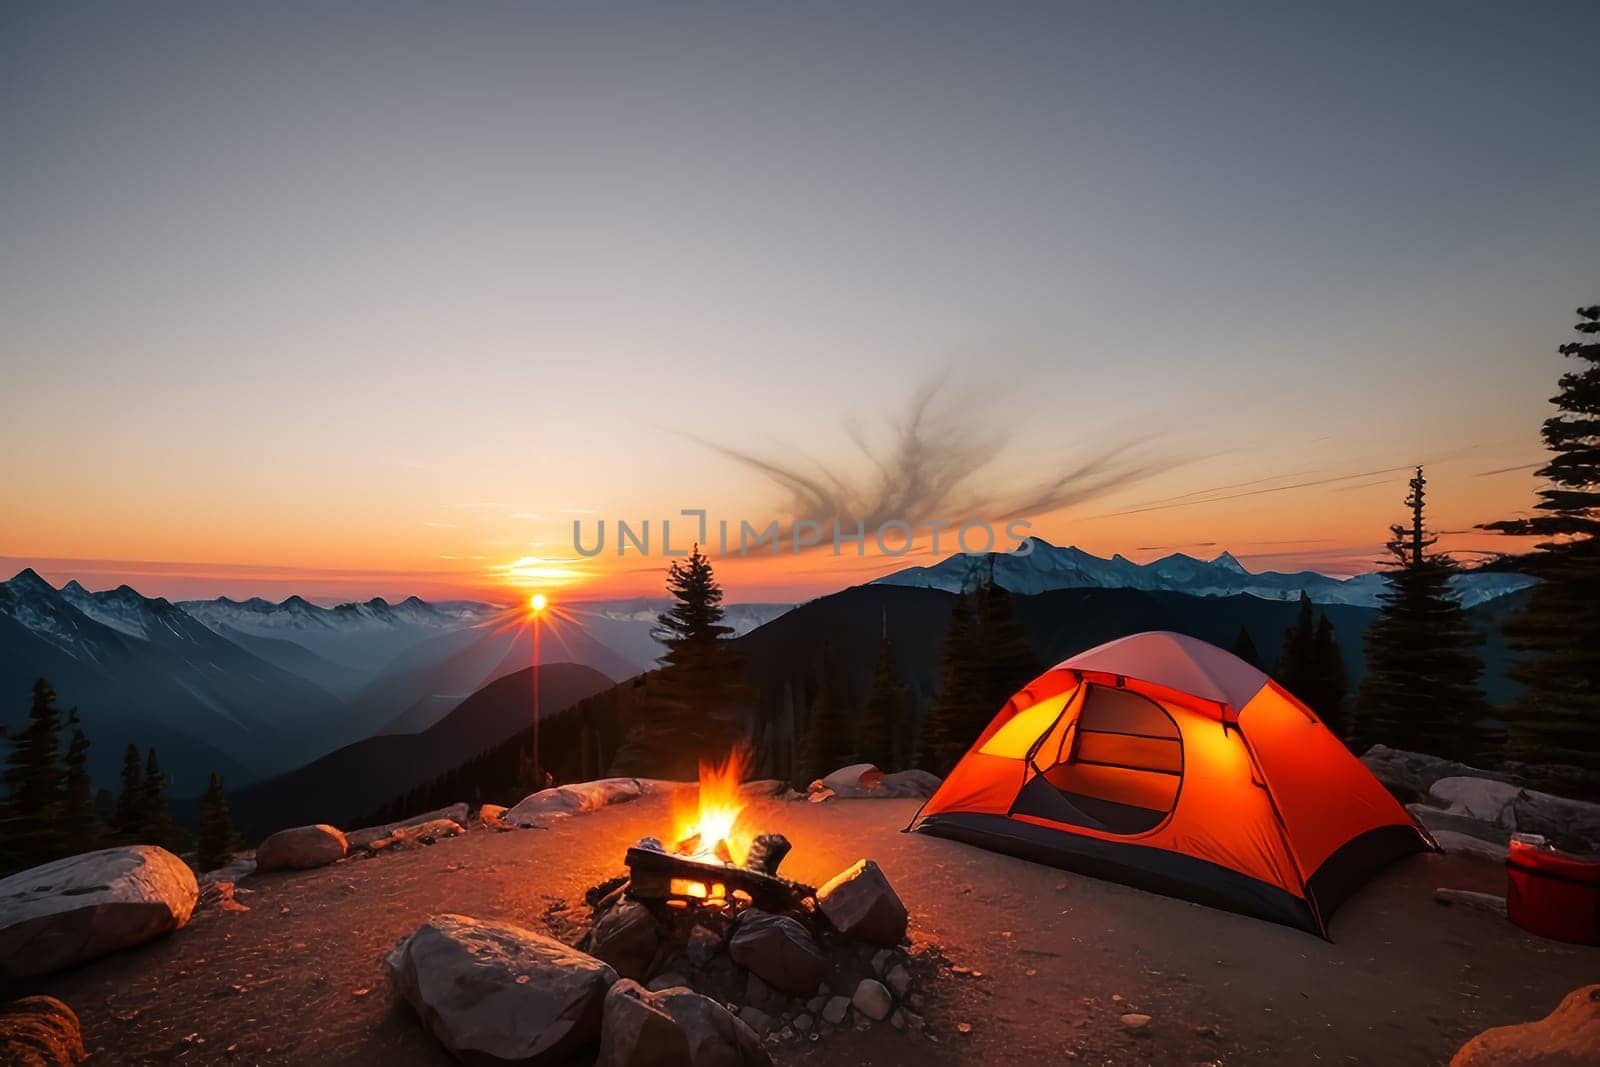 Camping tent high in the mountains at sunset by Annu1tochka